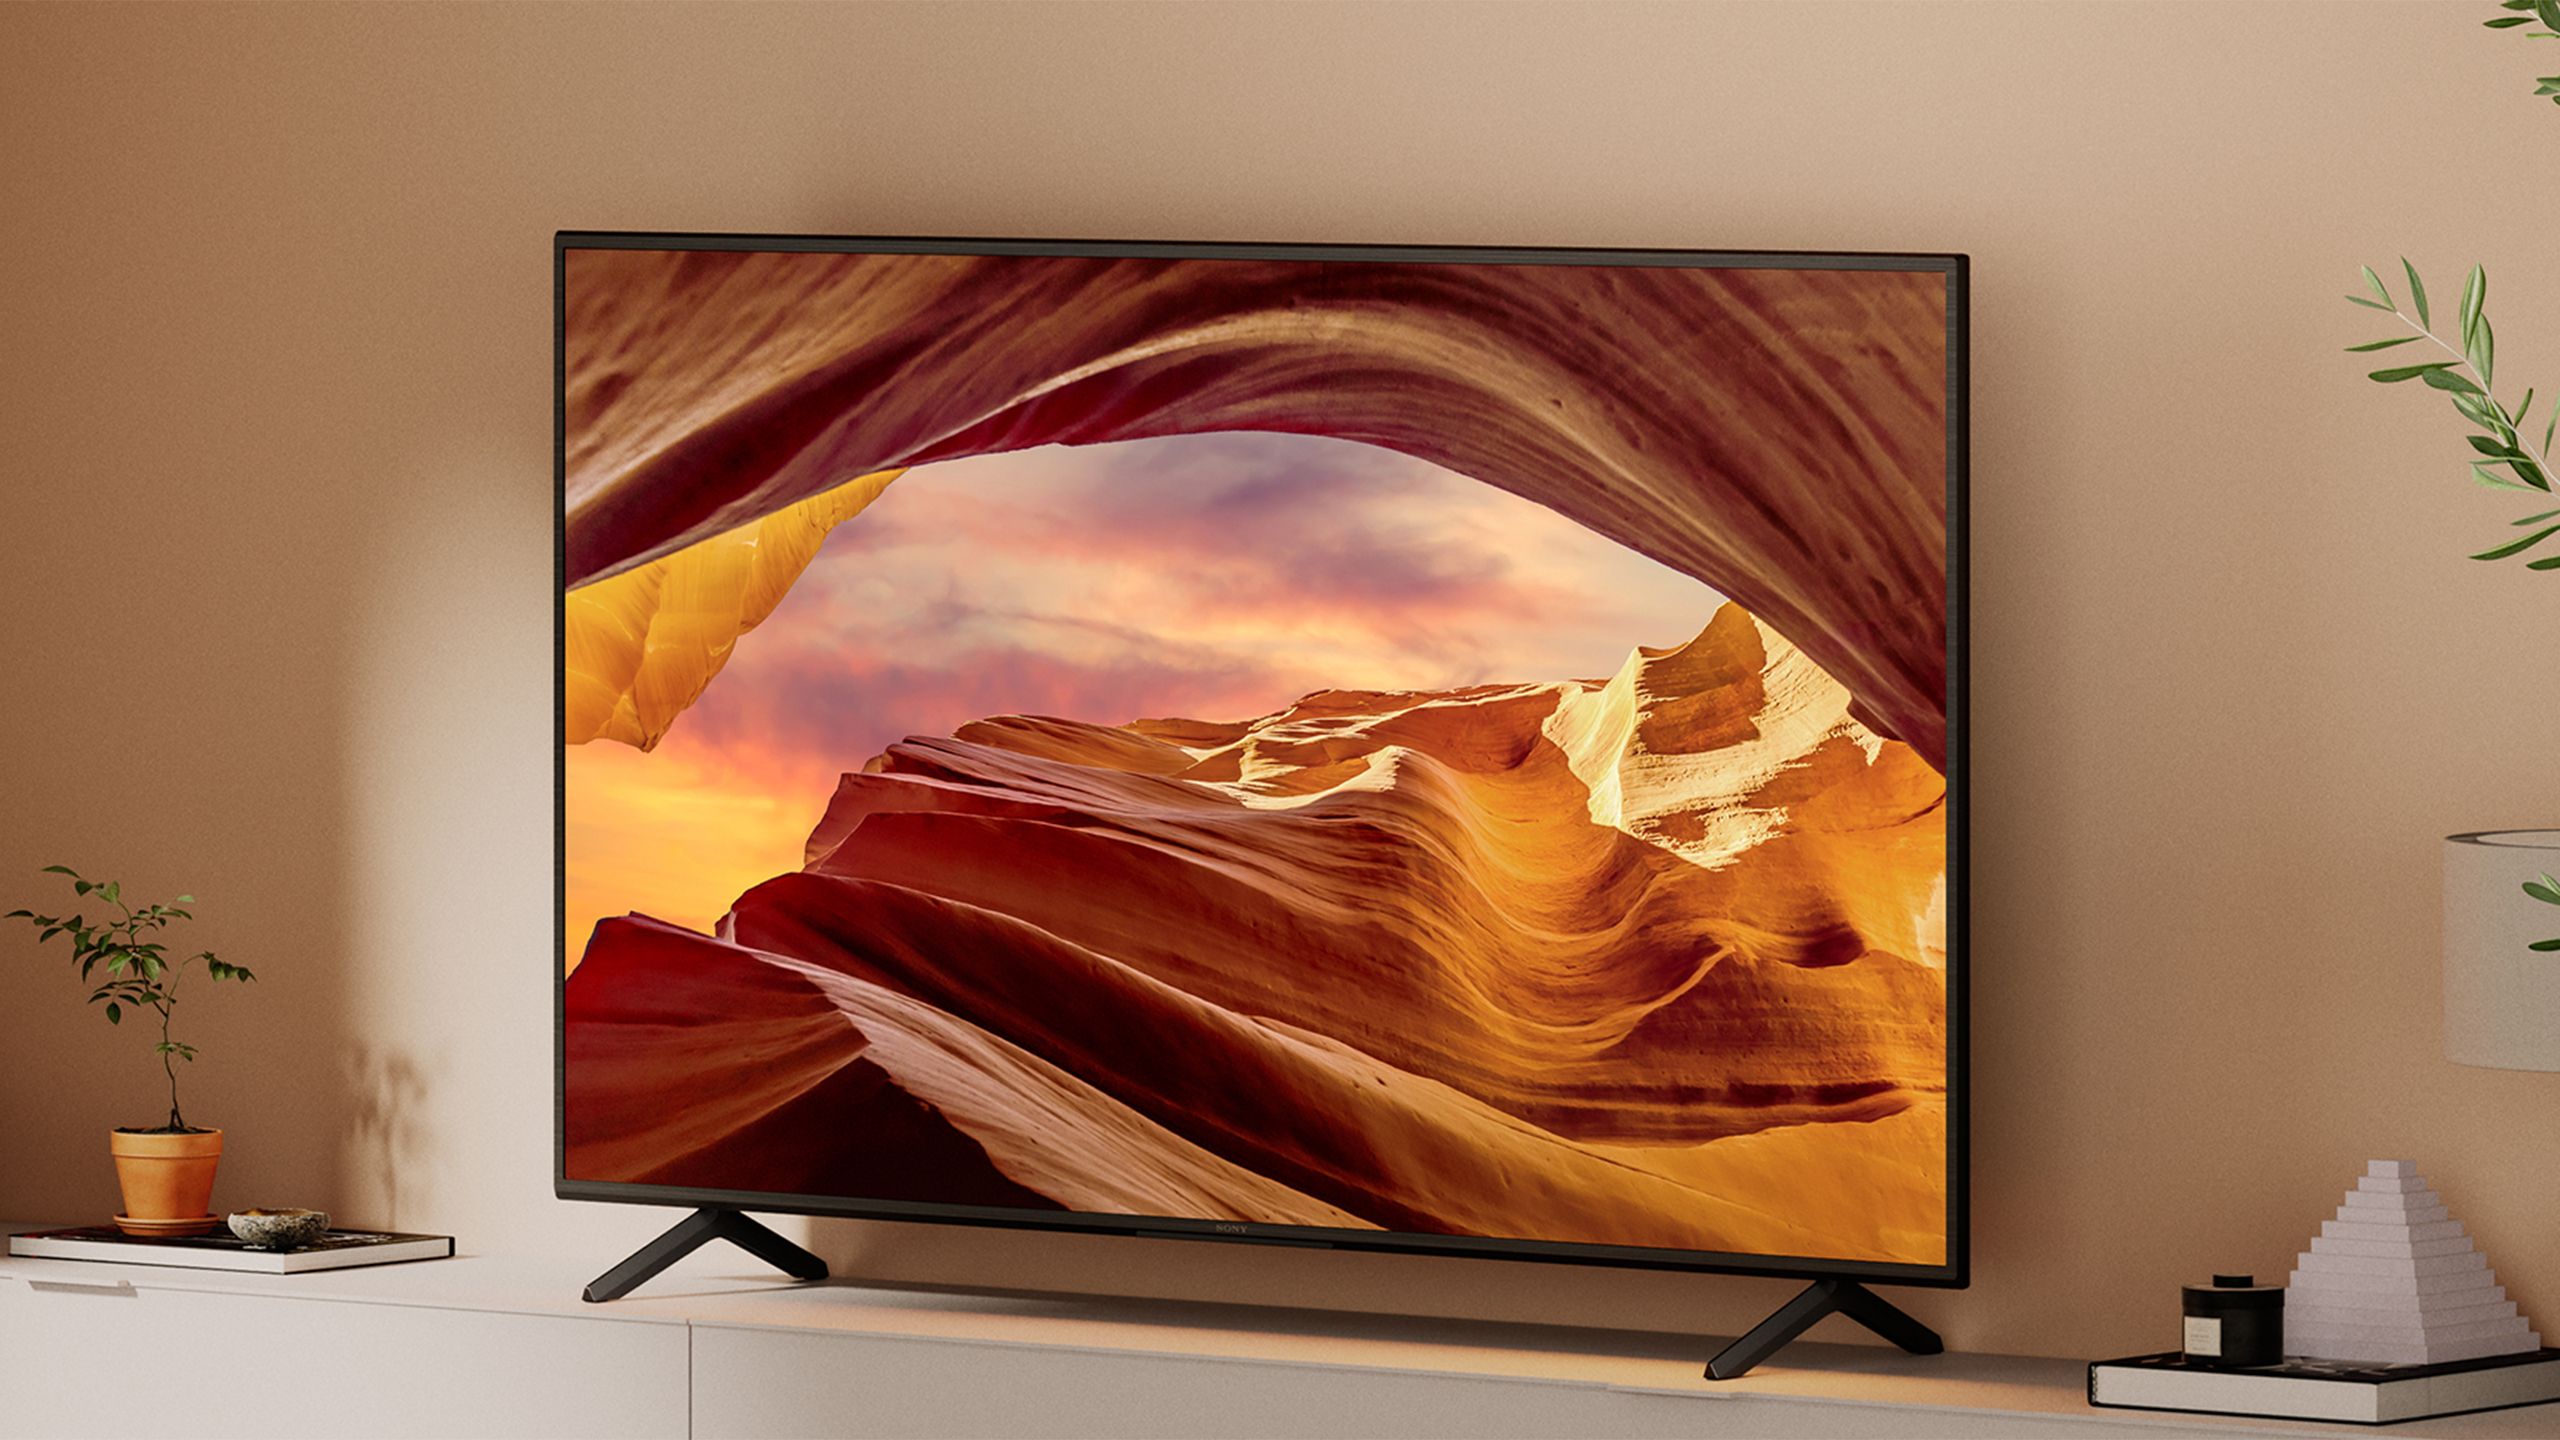 Sony OLED 4K Smart TV with image of a canyon